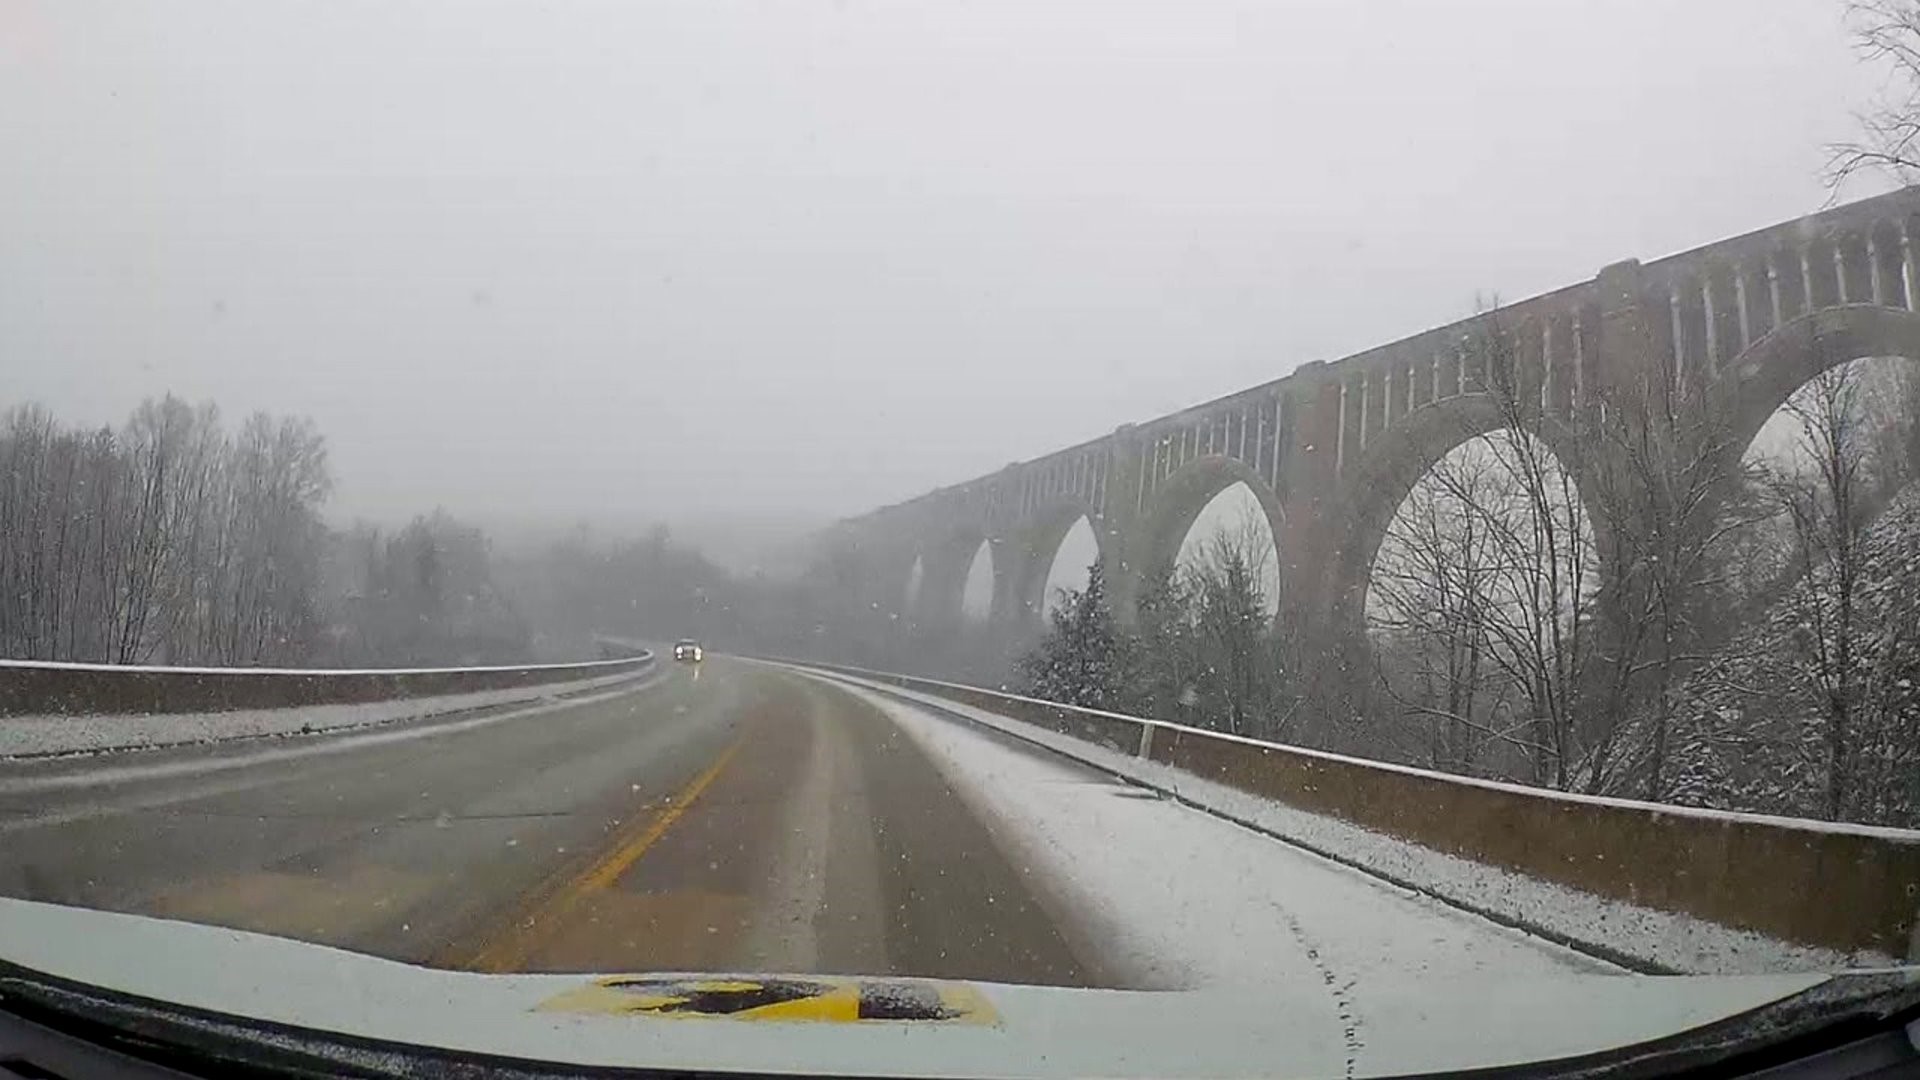 Newswatch 16 traveled through the county on Friday to check out the conditions.